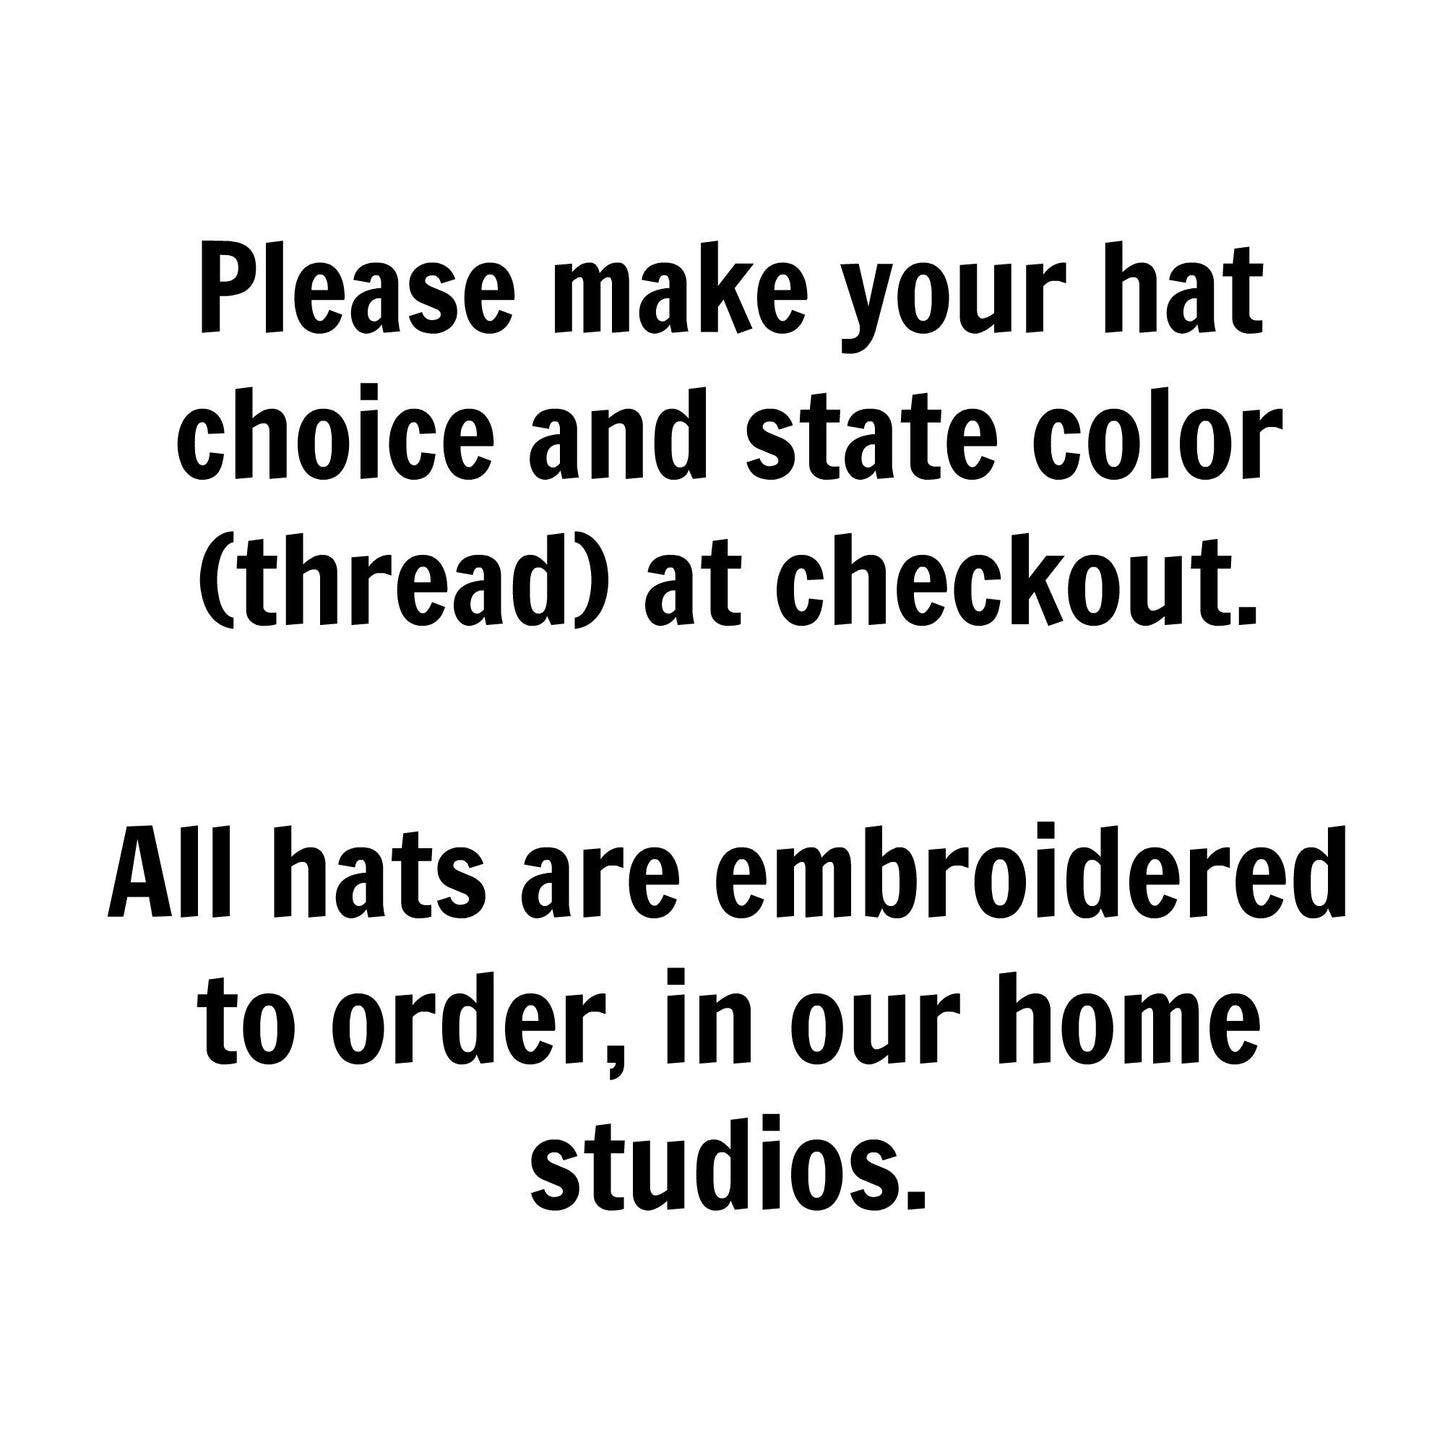 Iowa Hat - Classic Dad Hat - Many Color Combinations